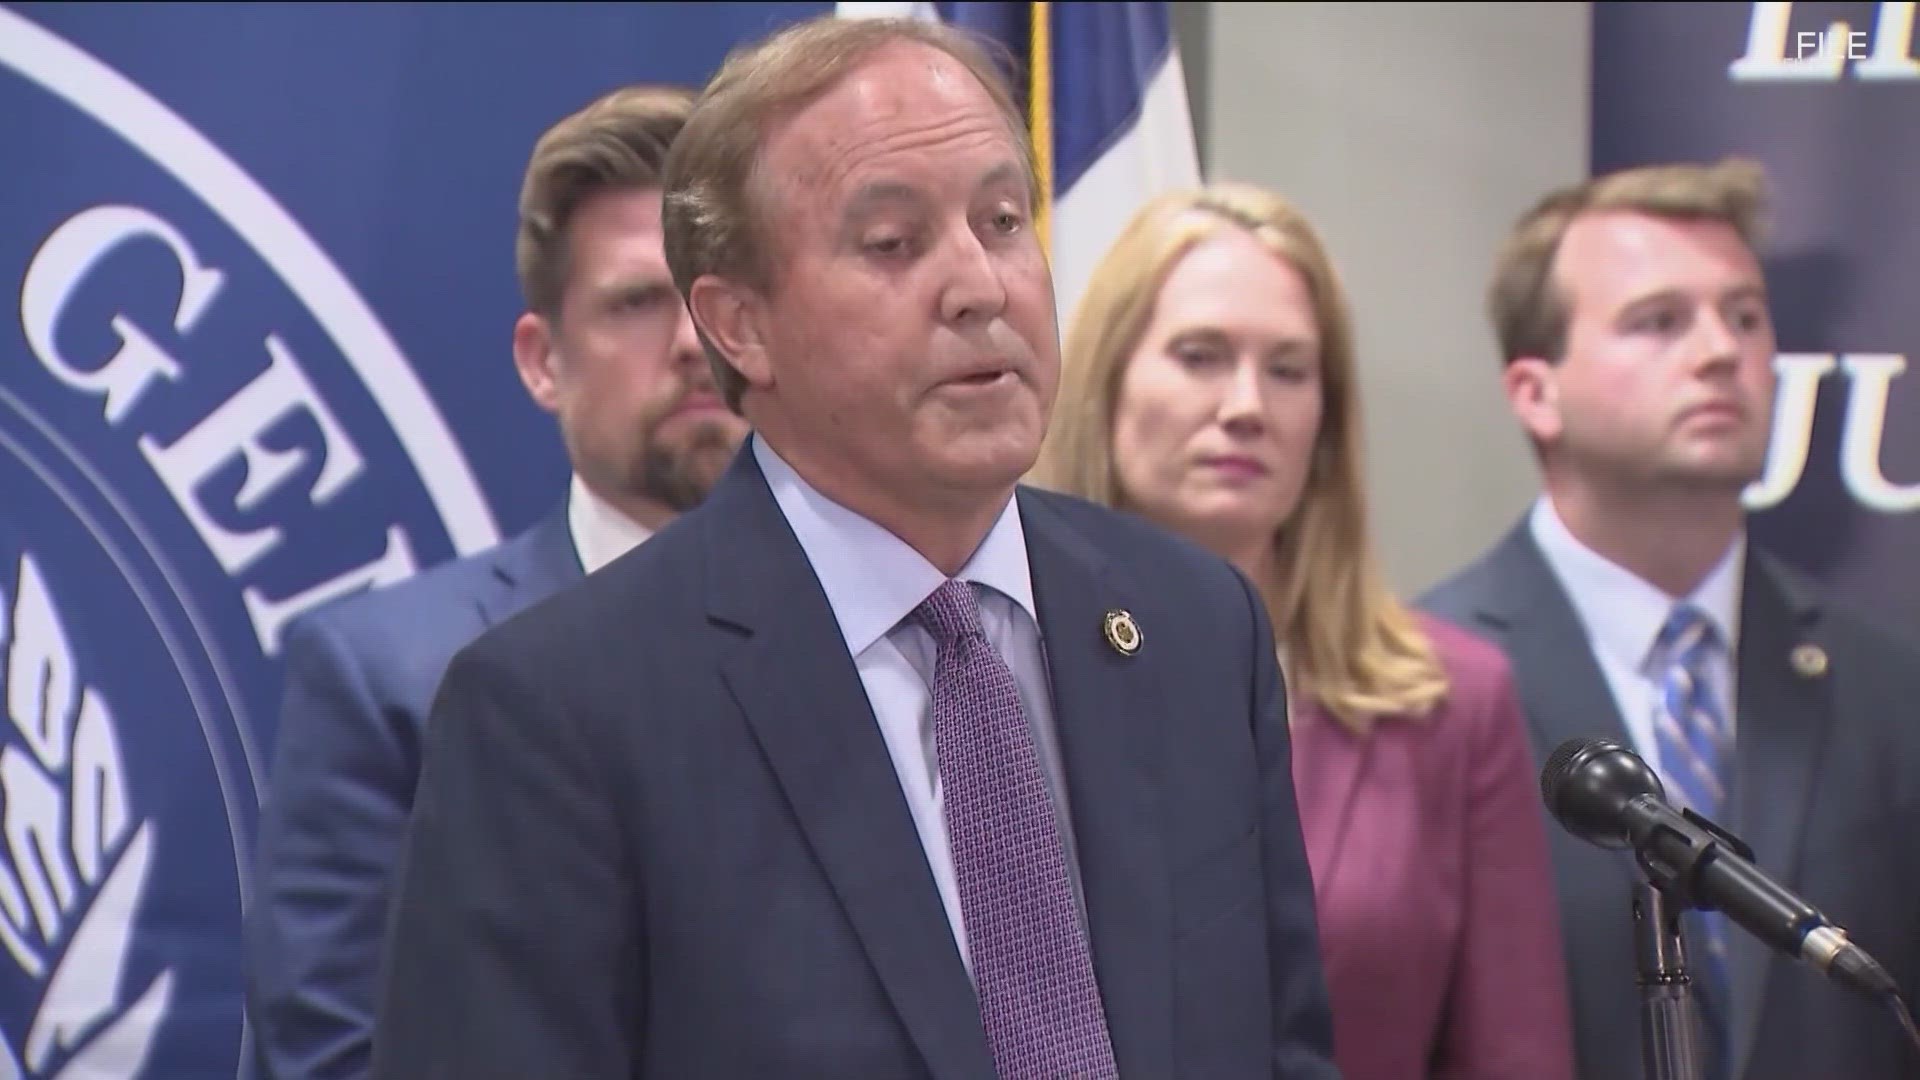 Marijuana advocates who helped put decriminalization measures on the ballot say Ken Paxton's actions are "anti-democratic."